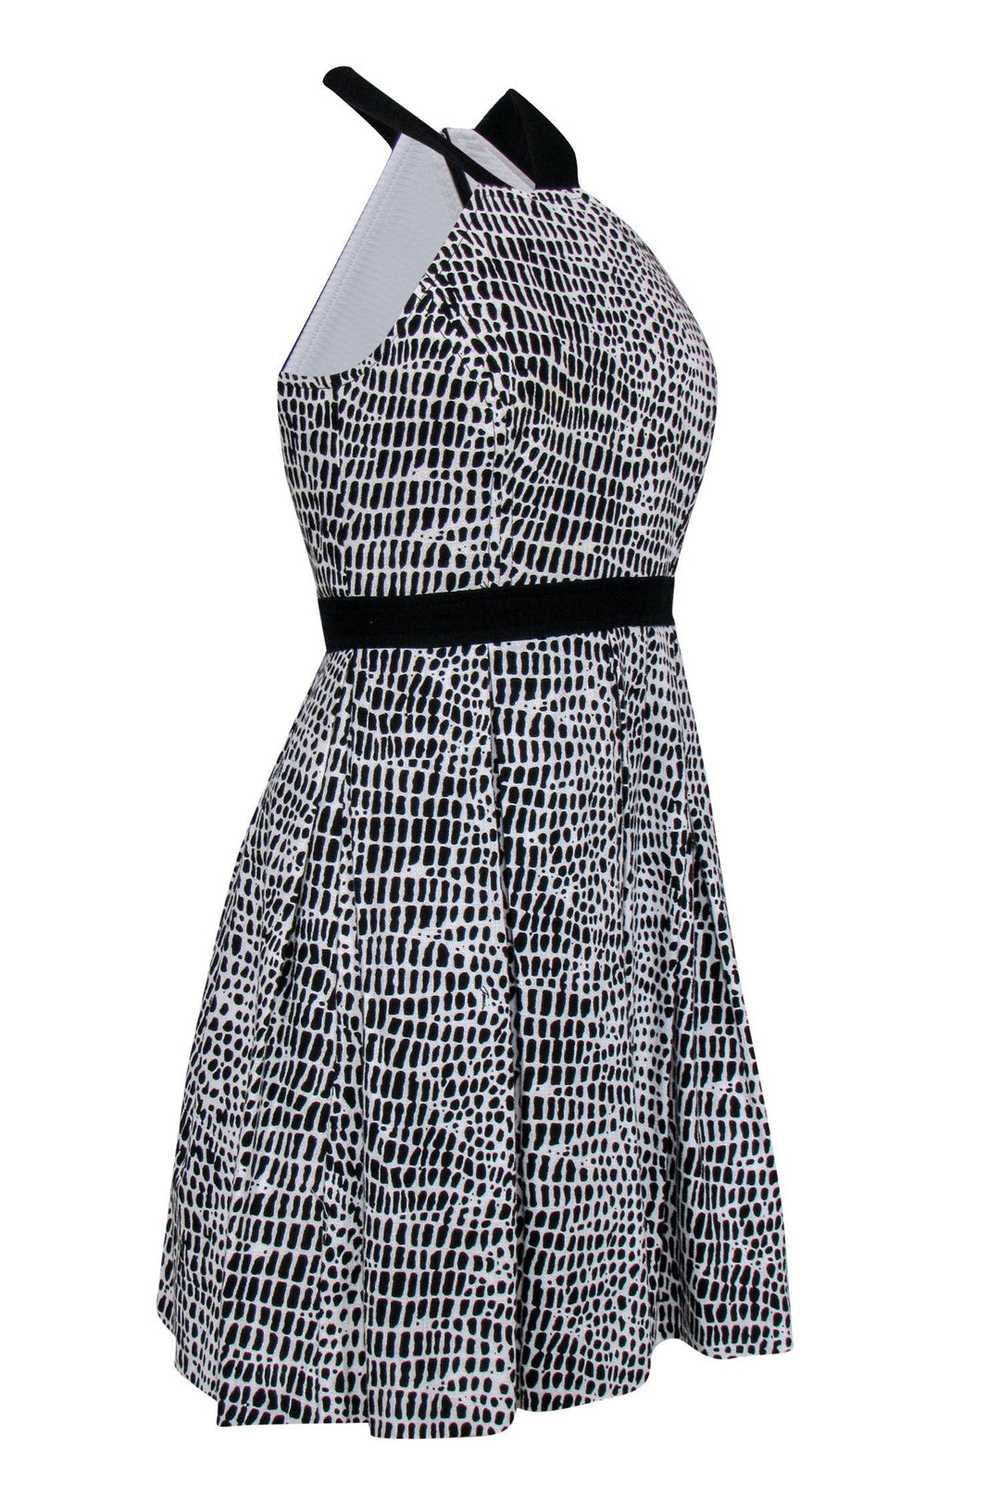 Trina Turk - Black & White Spotted Woven Cotton A… - image 2